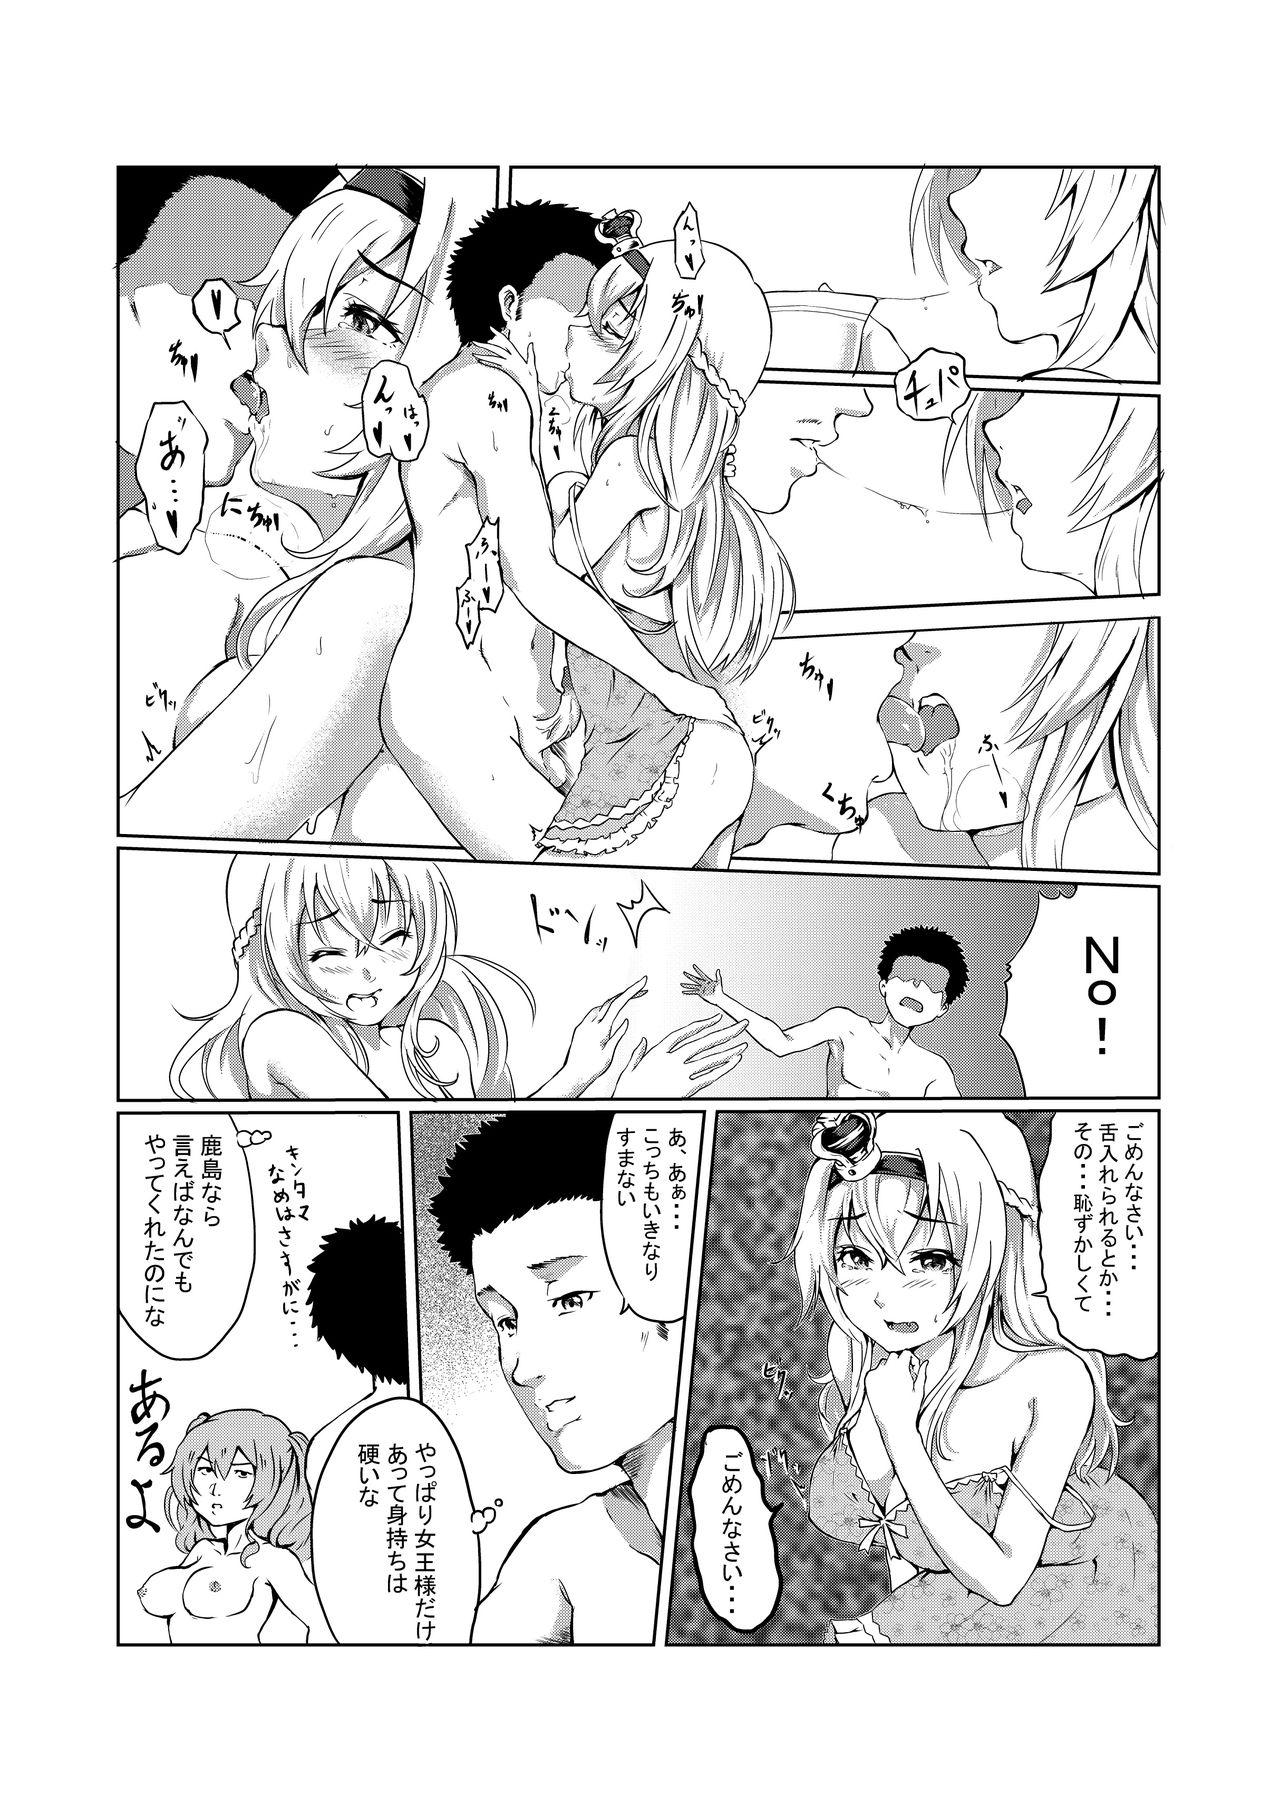 Jerking Off 女王陛下の手淫蜜壺 - Kantai collection Toy - Page 3